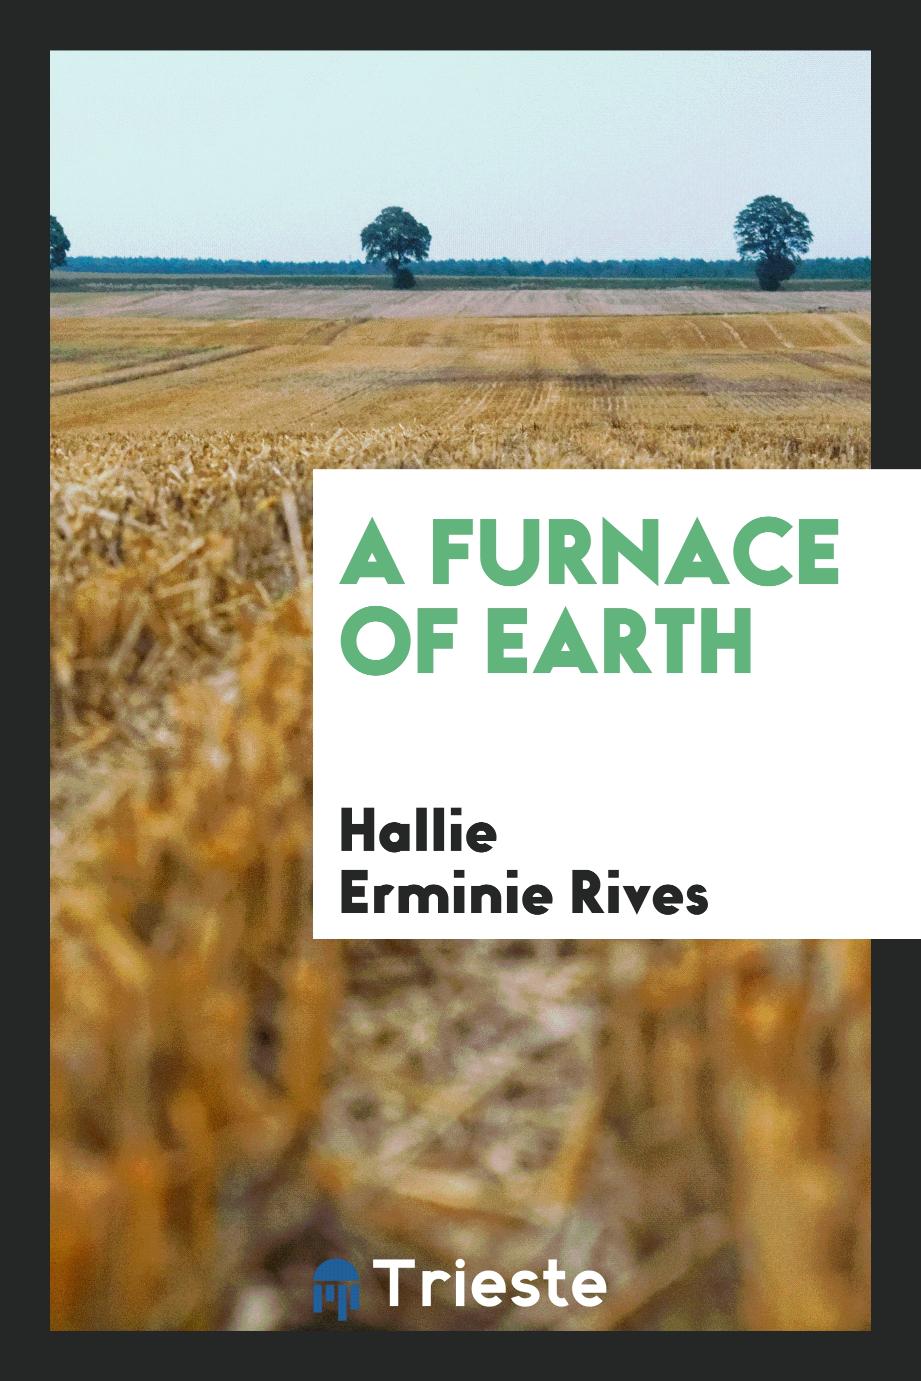 A furnace of earth